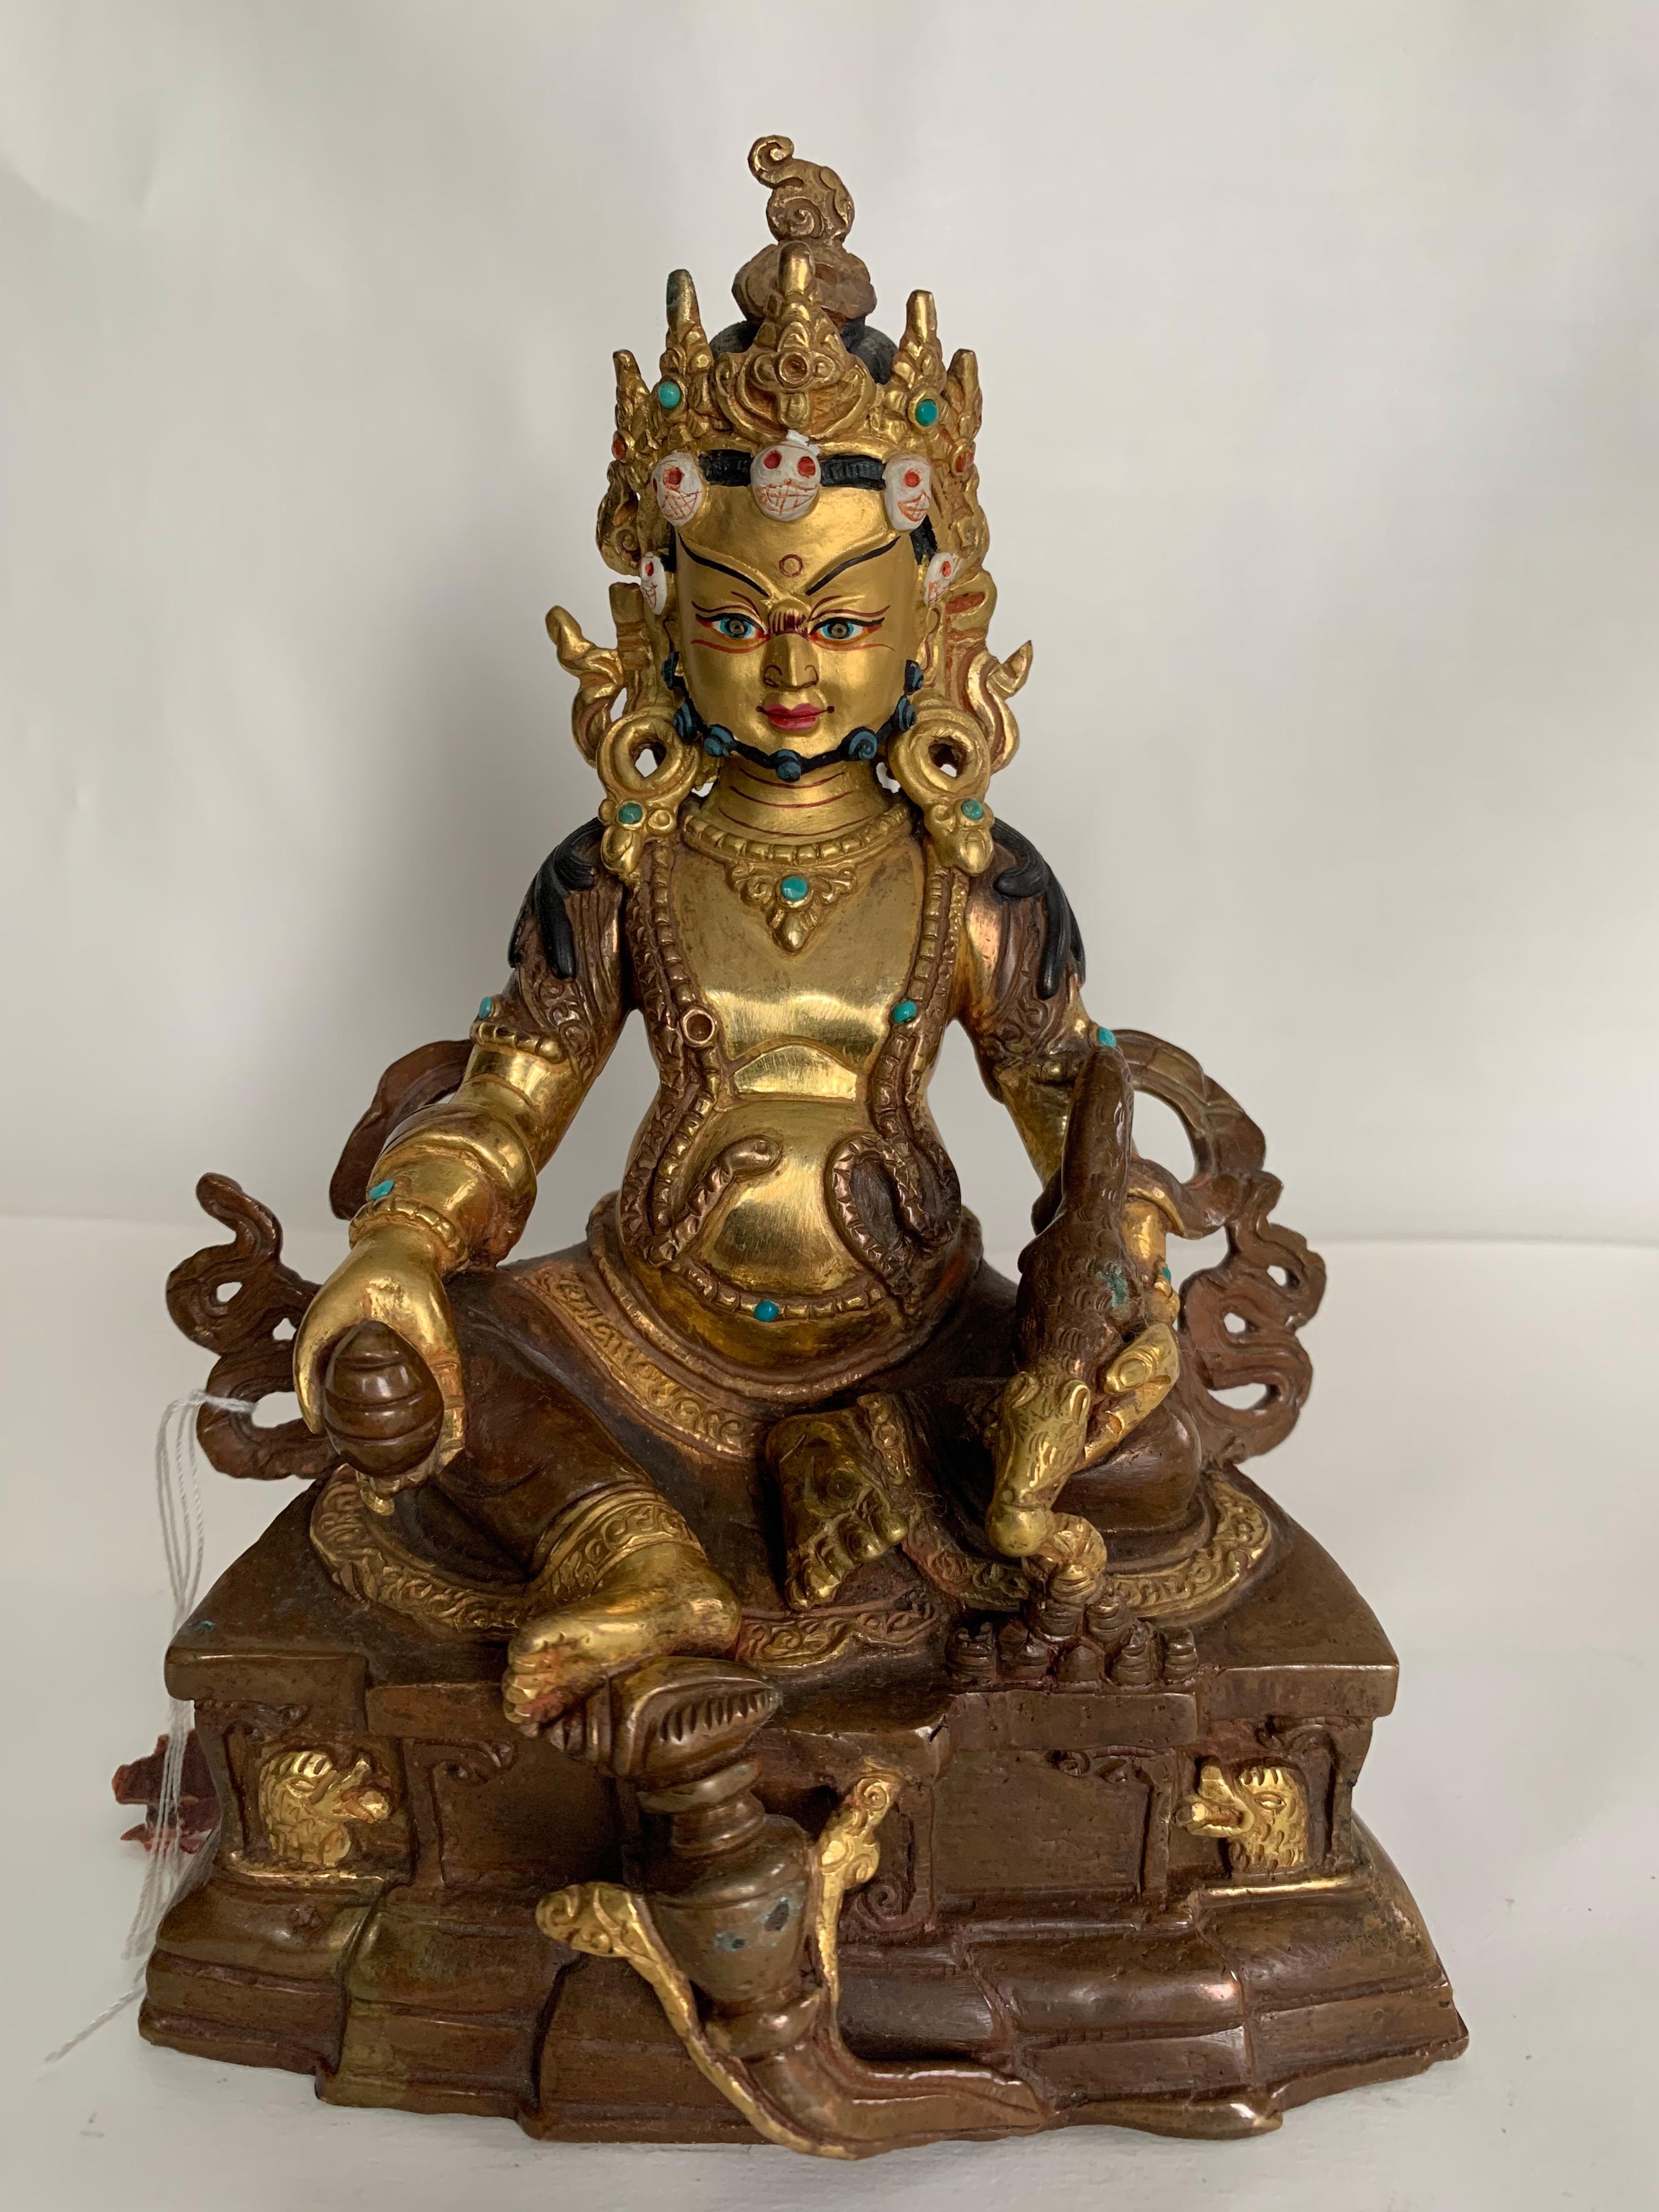 Unknown Figurative Sculpture - Kubera Statue 6 Inch with 24K Gold Handcrafted by Lost Wax Process